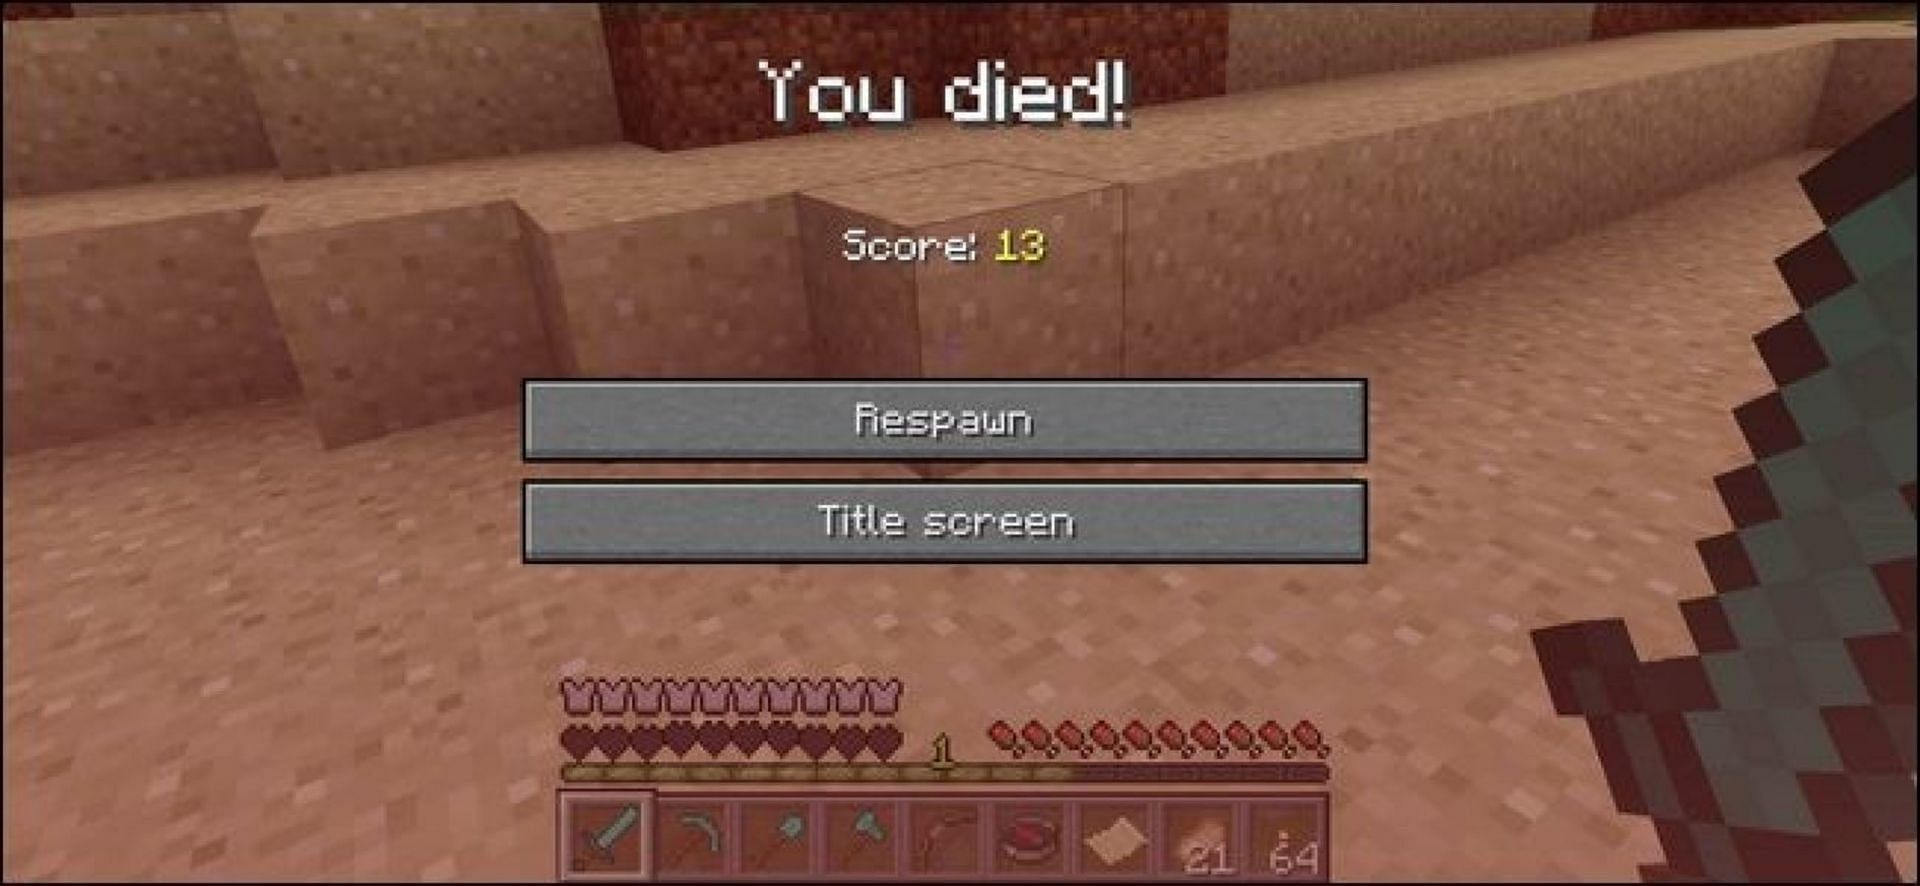 Losing all items on death can be aggravating in Minecraft, but a quick command can help ease the pain (Image via Mojang)